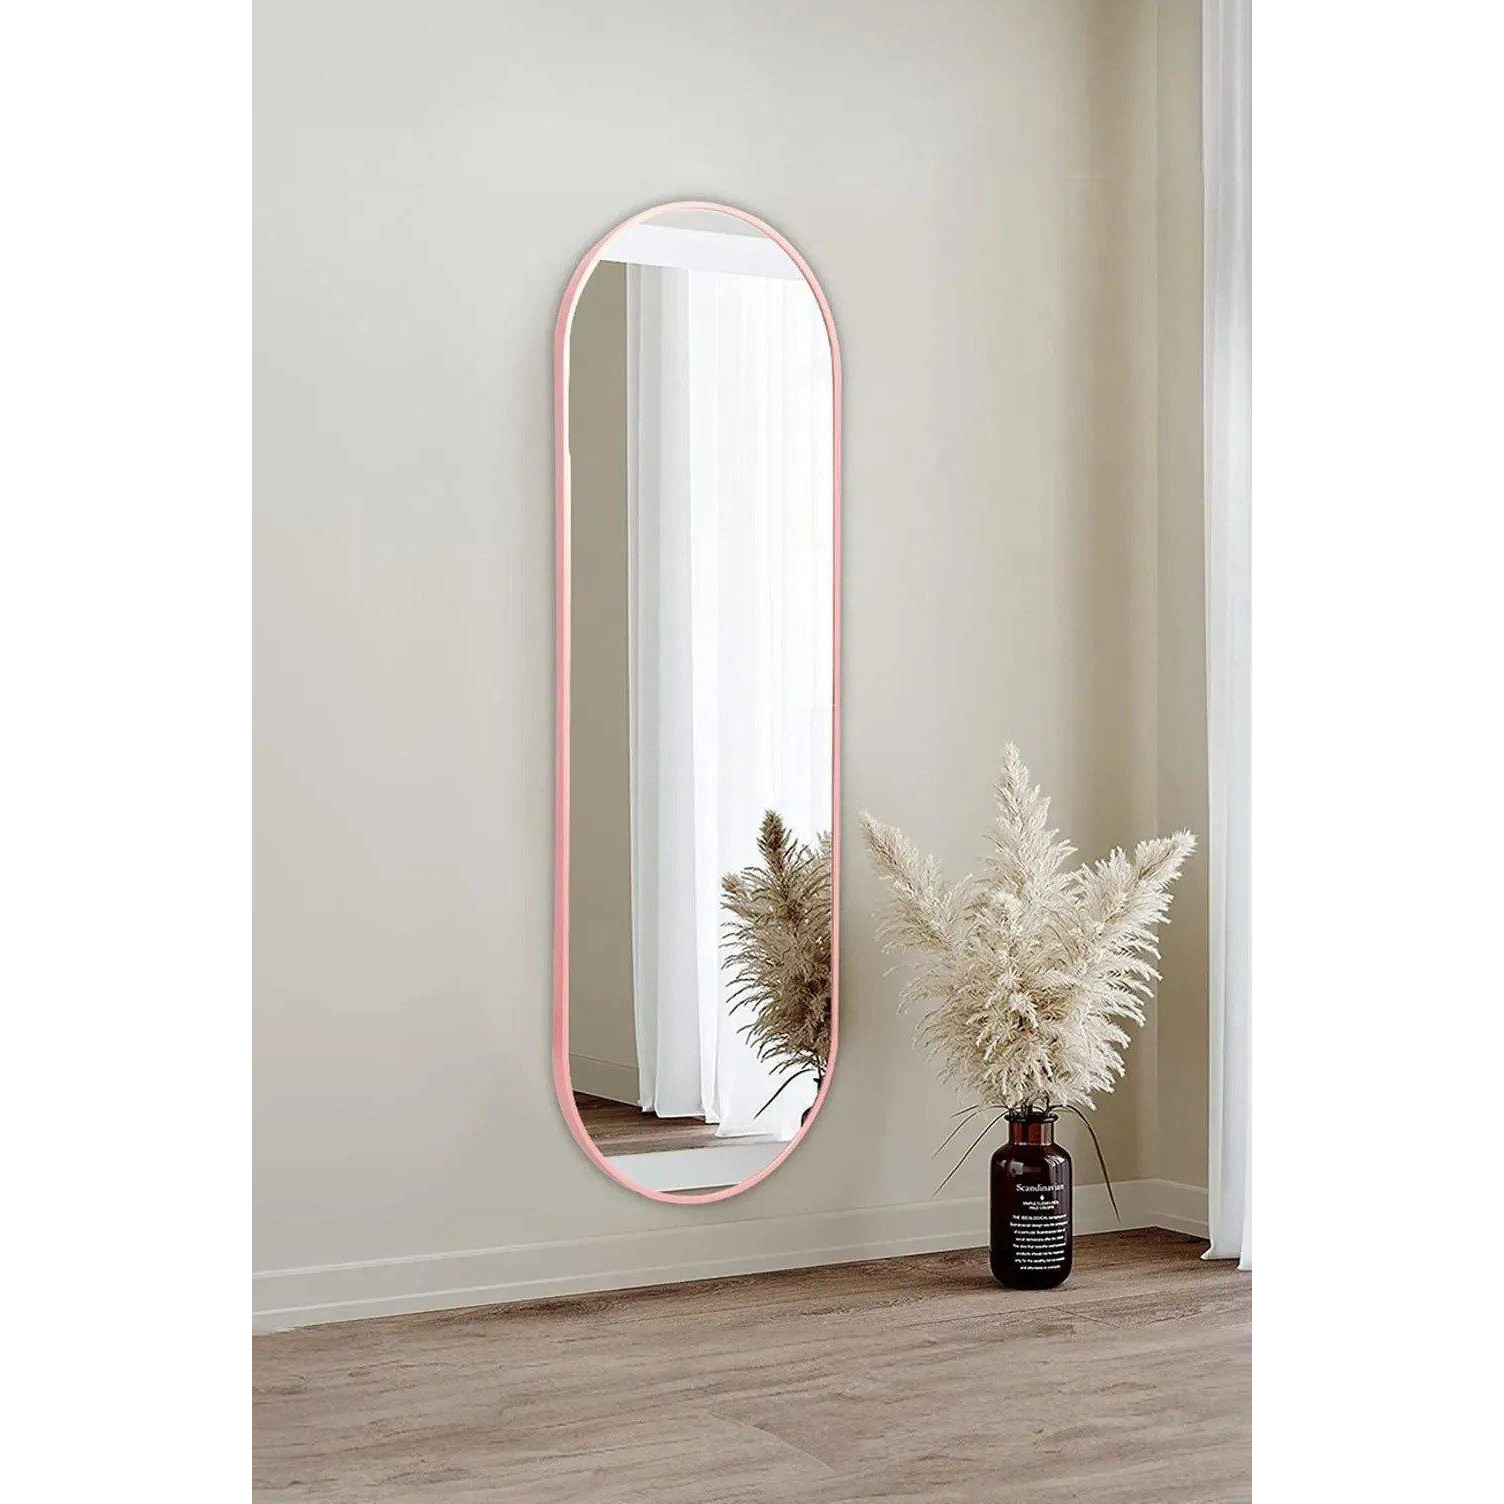 40cm W x 150cm H Rose Gold Modern Oval Metal Wall Mounted Full Length Mirror - image 1